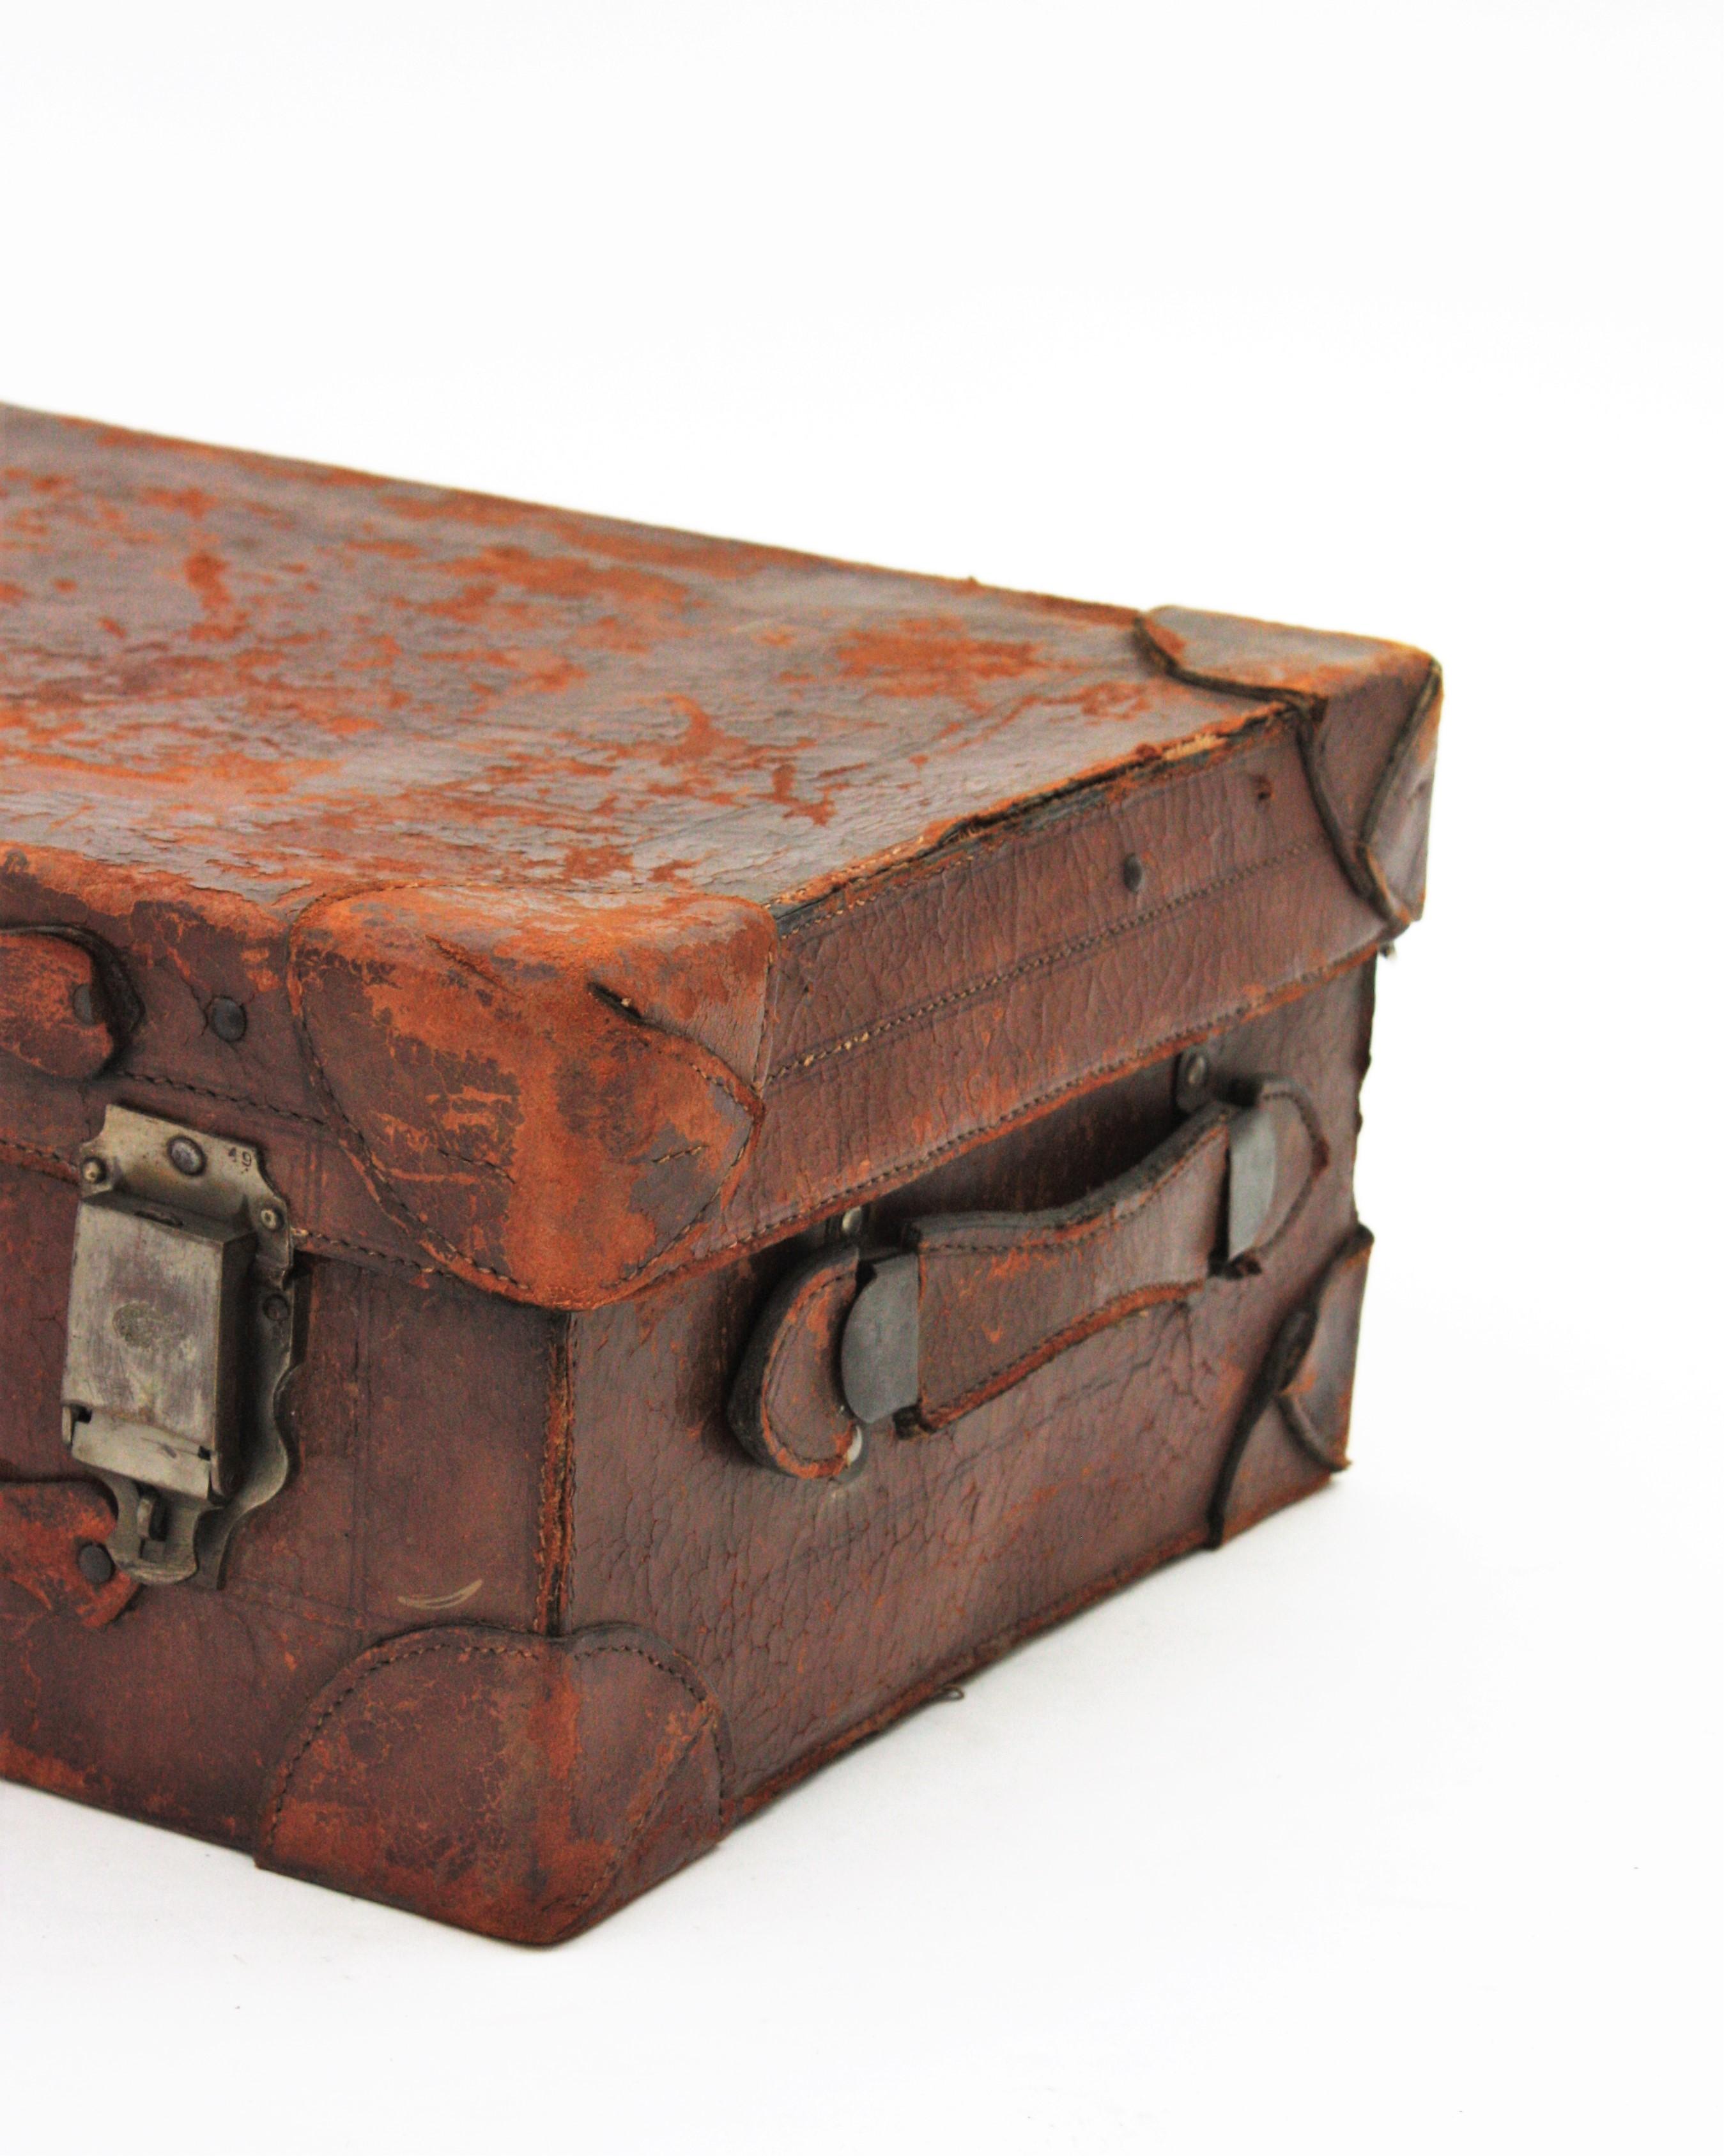 Metal Antique English Leather Suitcase For Sale